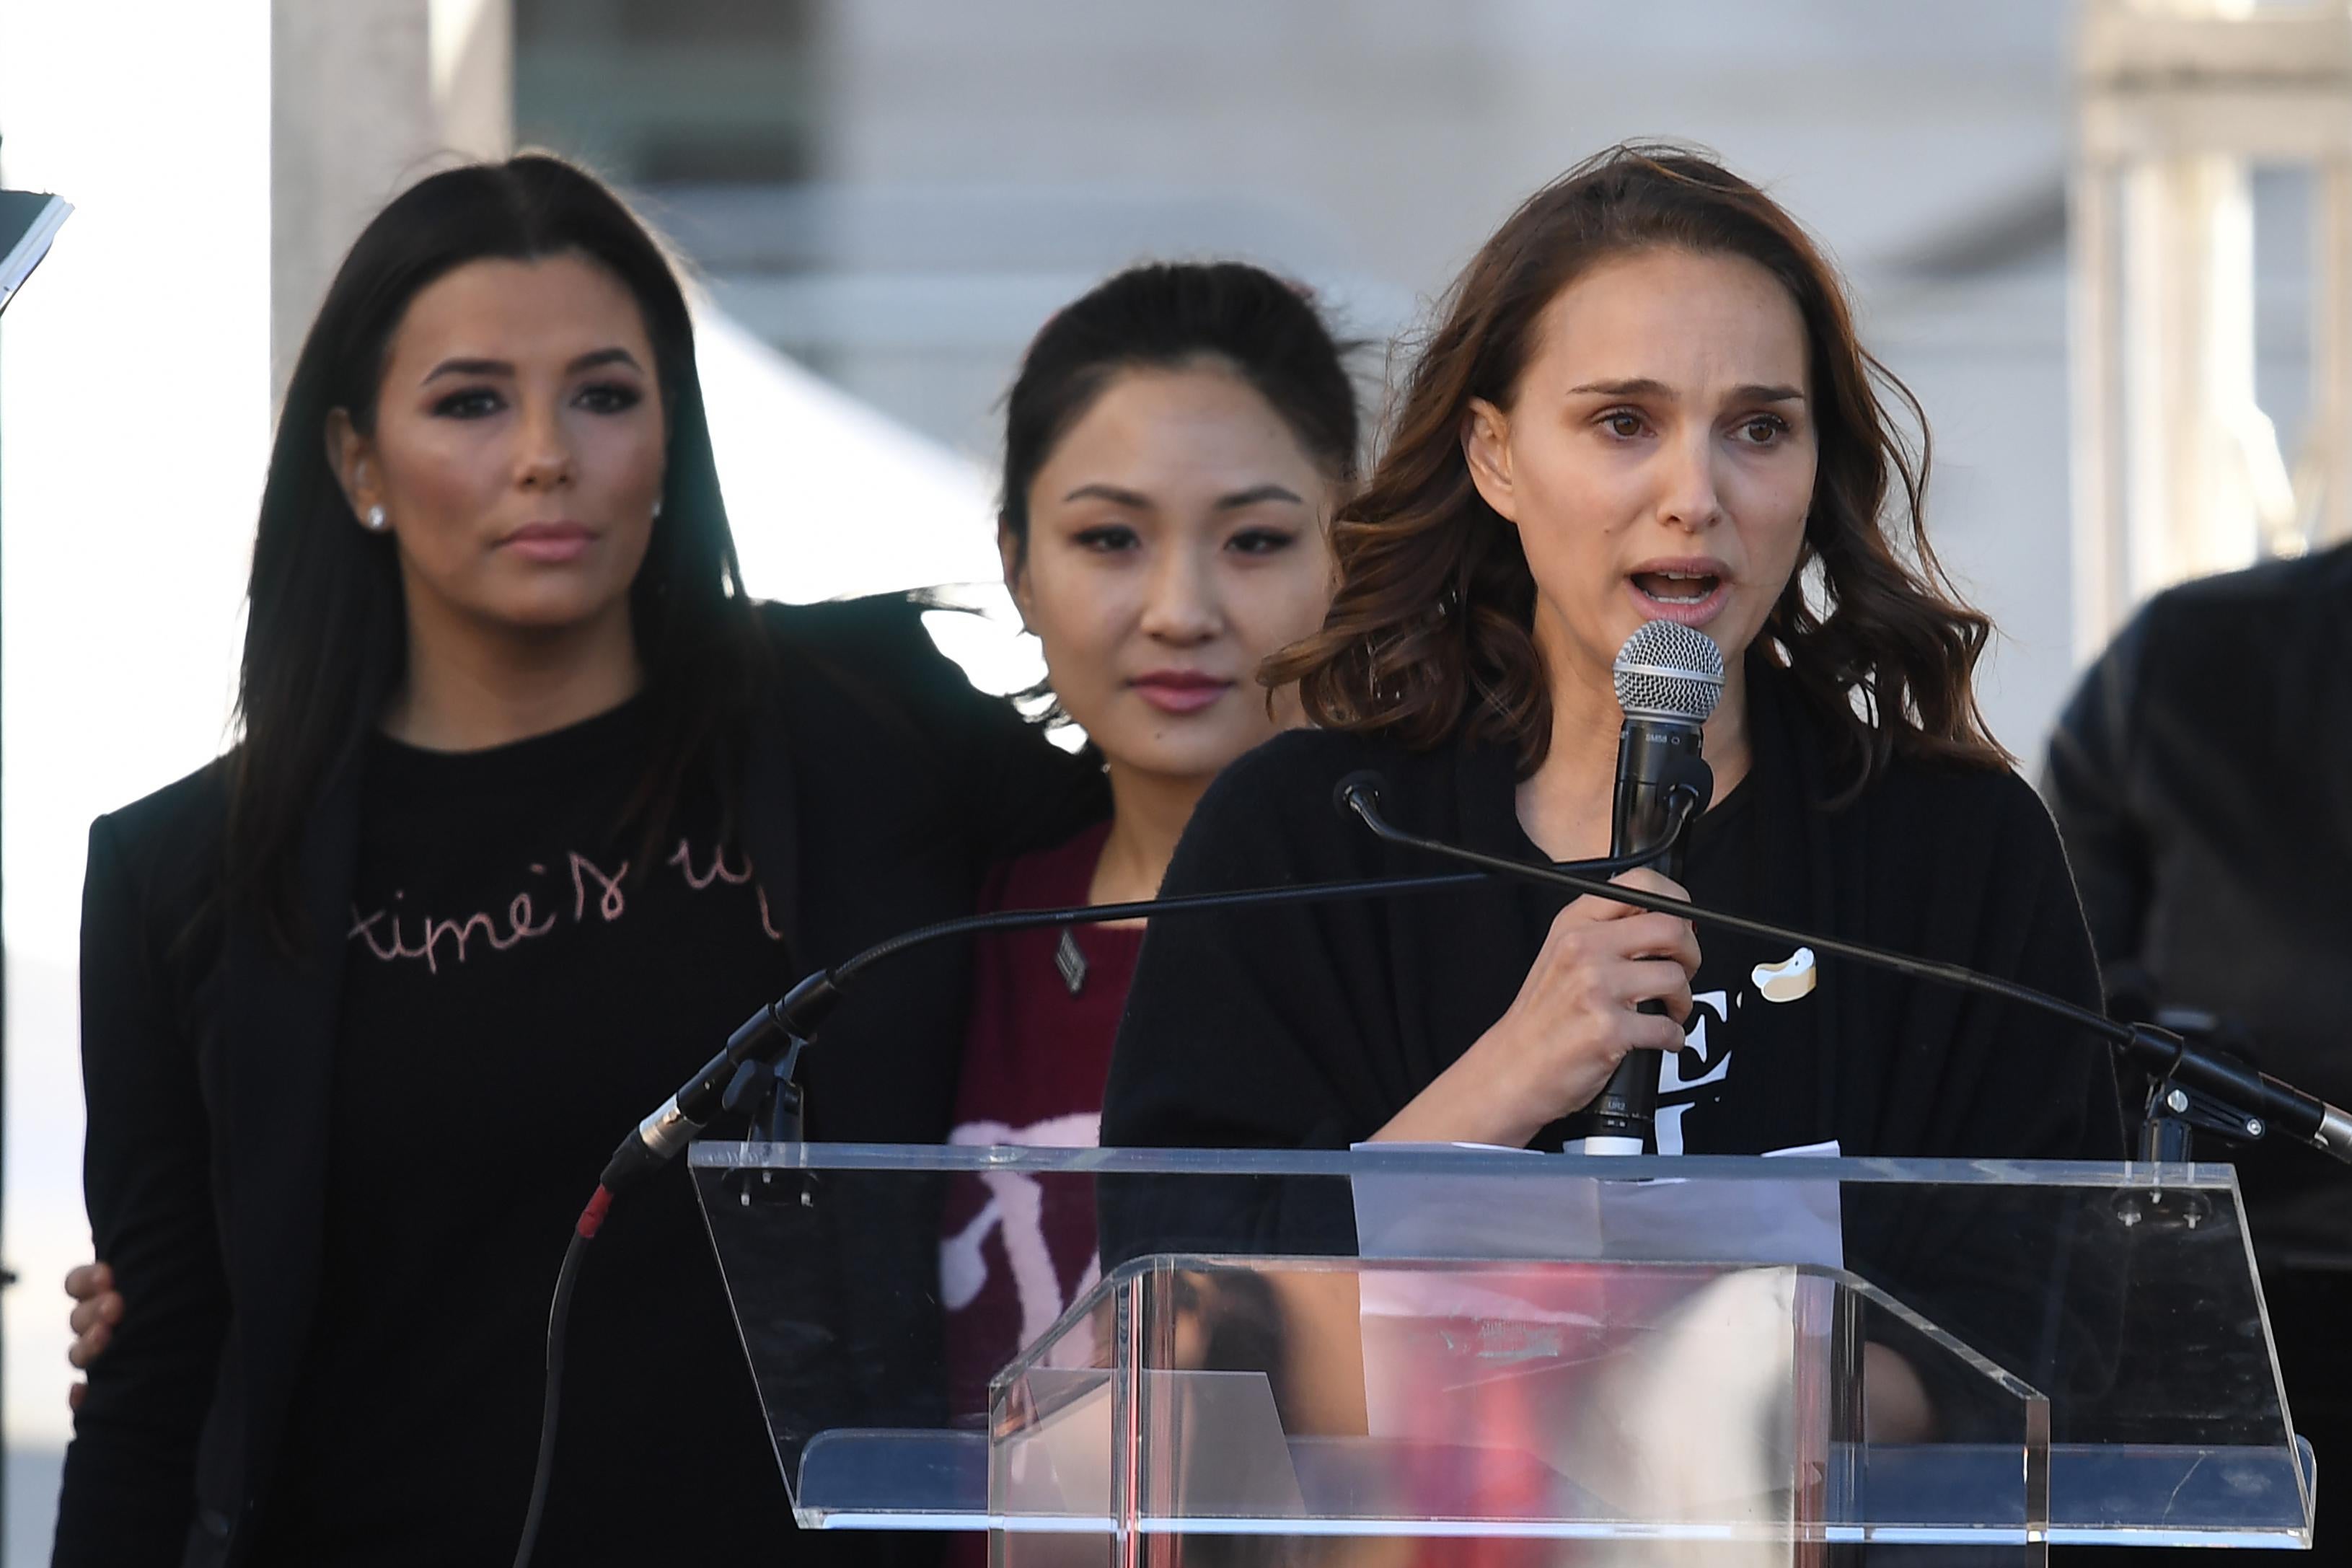 Natalie Portman speaks at a podium while actors Eva Longoria and Constance Wu stand behind her.